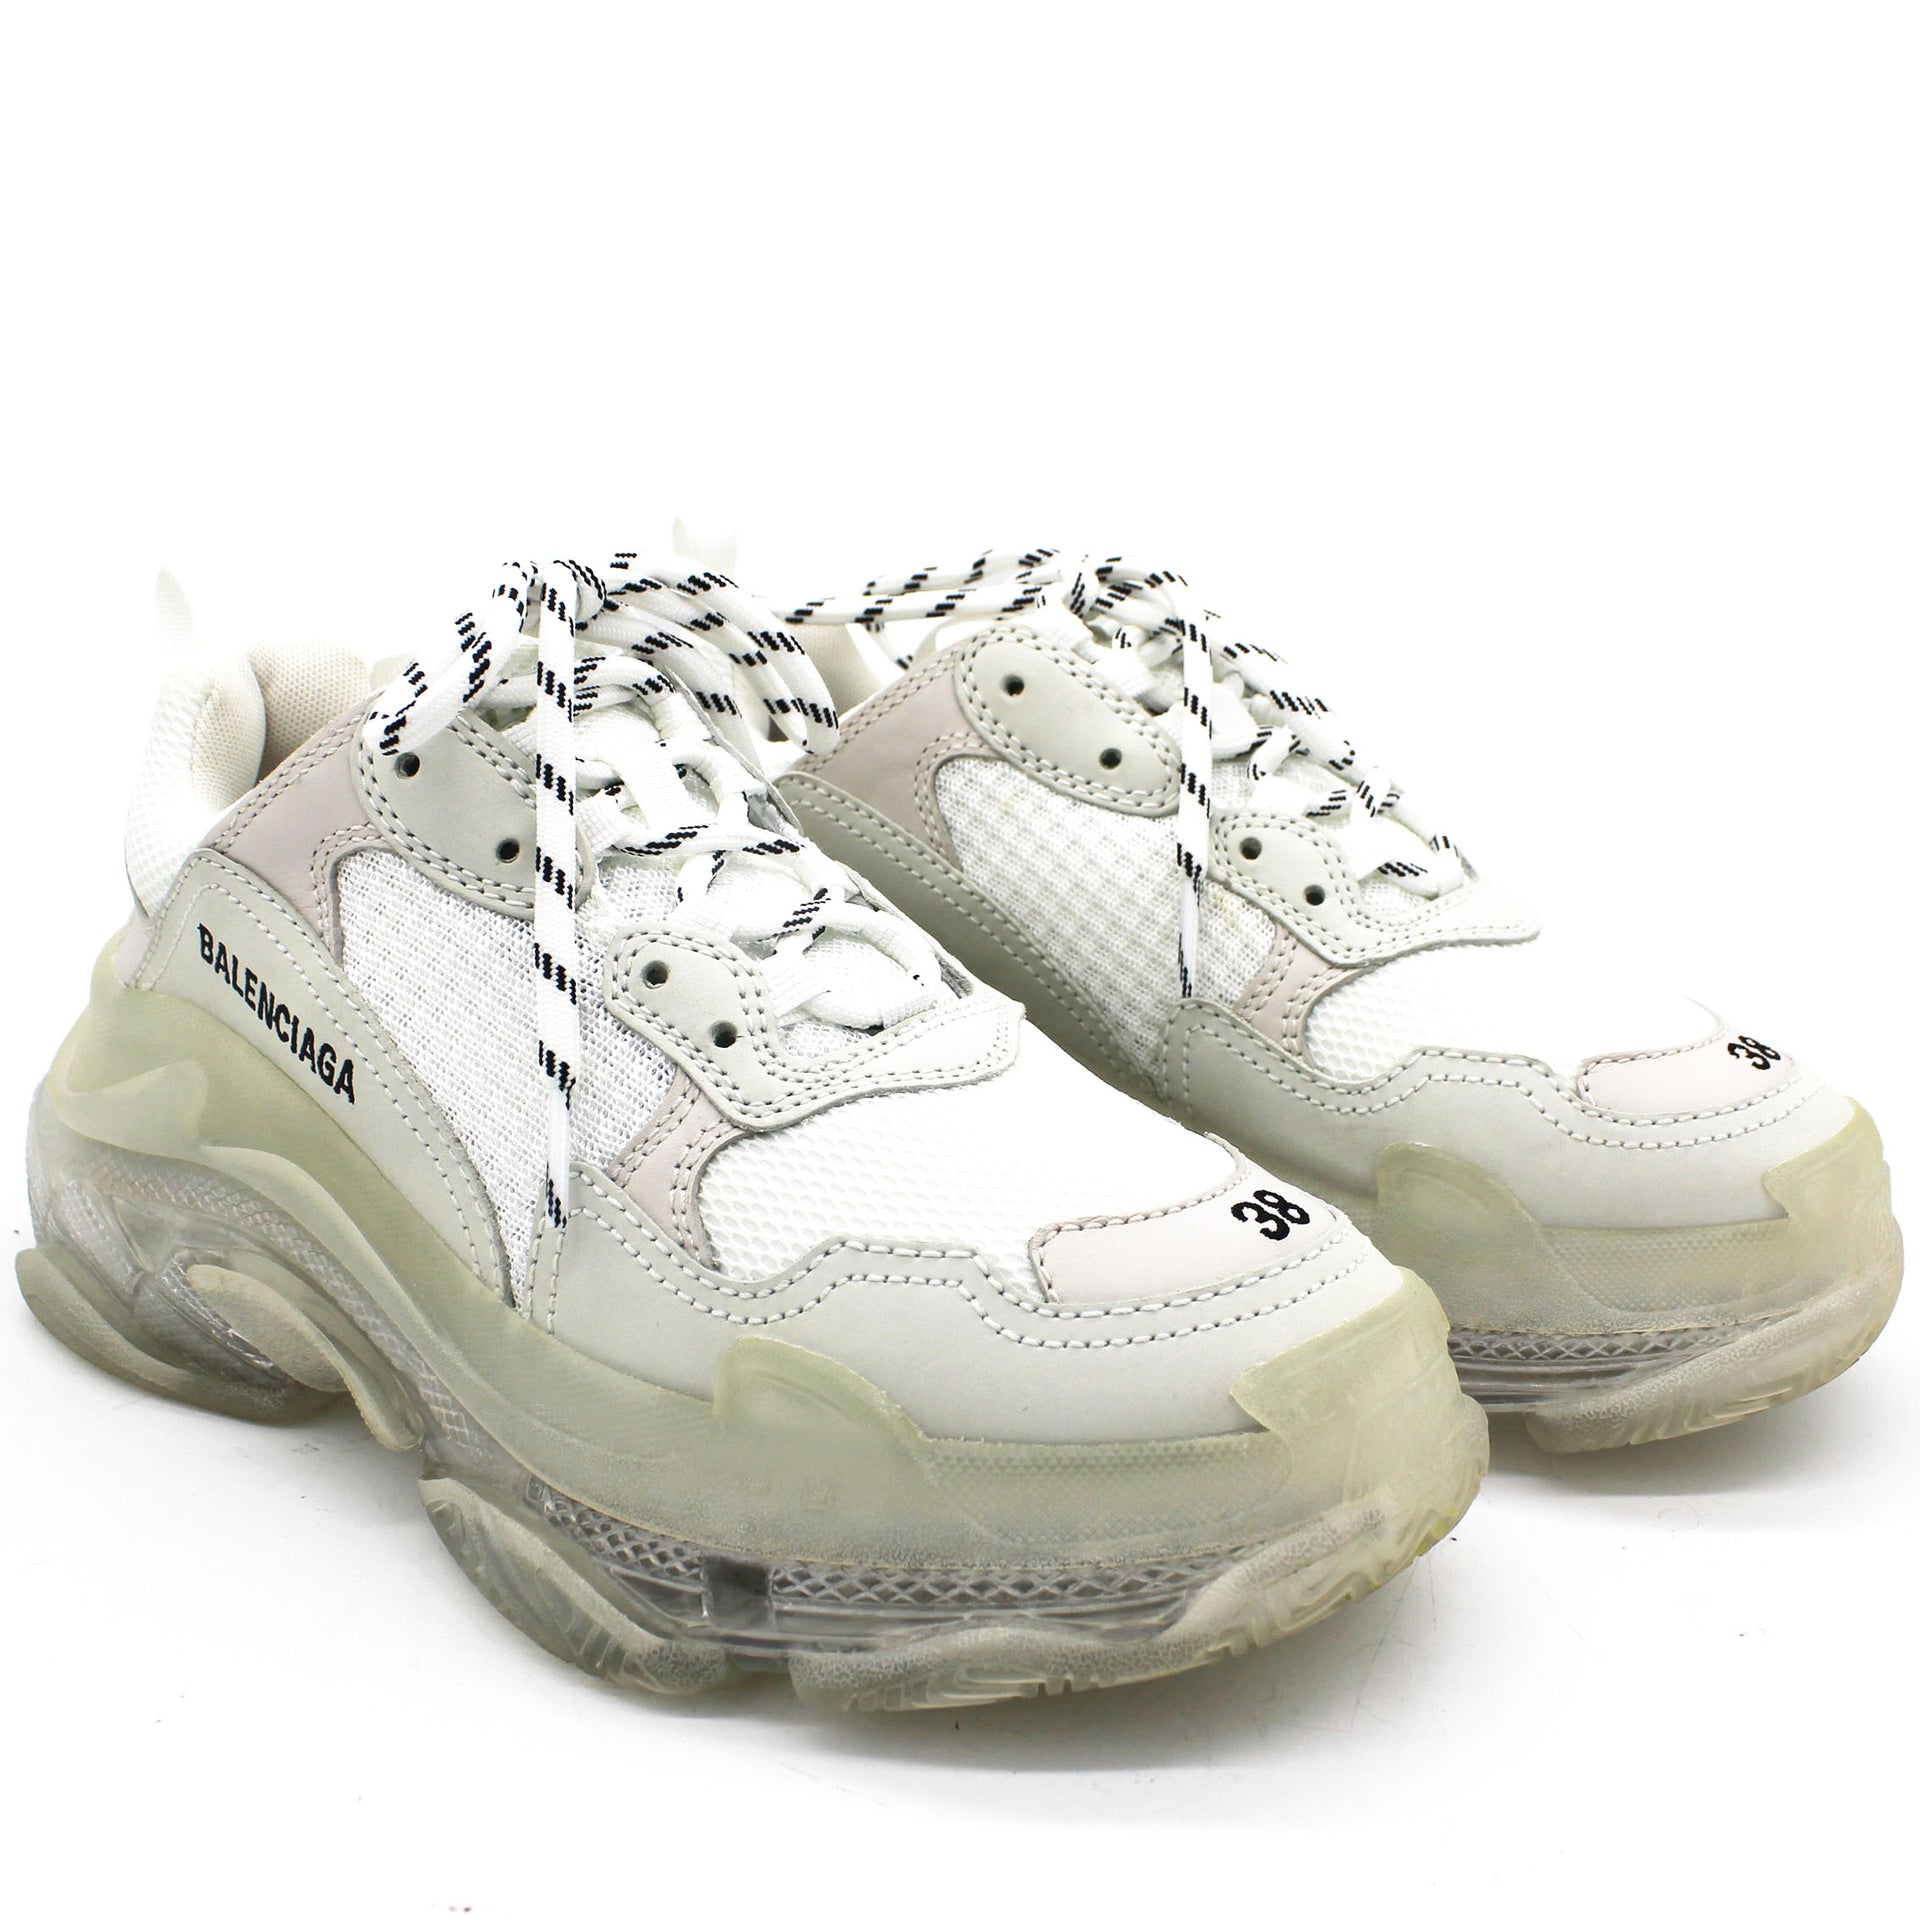 Balenciaga White Mesh And Leather Triple S Clear Sole Low Top Sneaker 38   STYLISHTOP